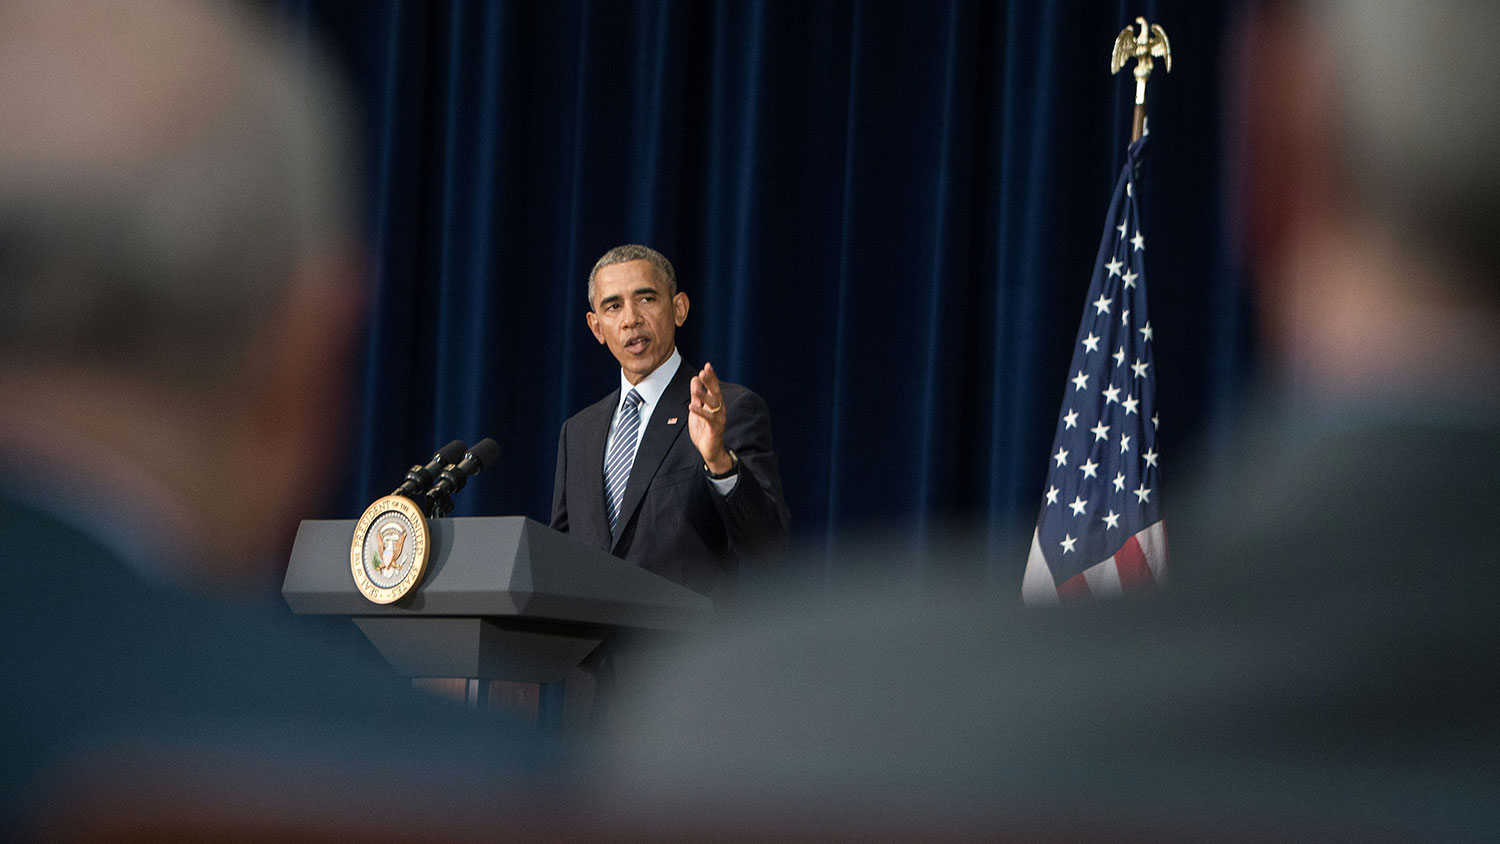 President Barack Obama addresses the Chief of Missions conference at the State Department in Washington on March 14, 2016.
